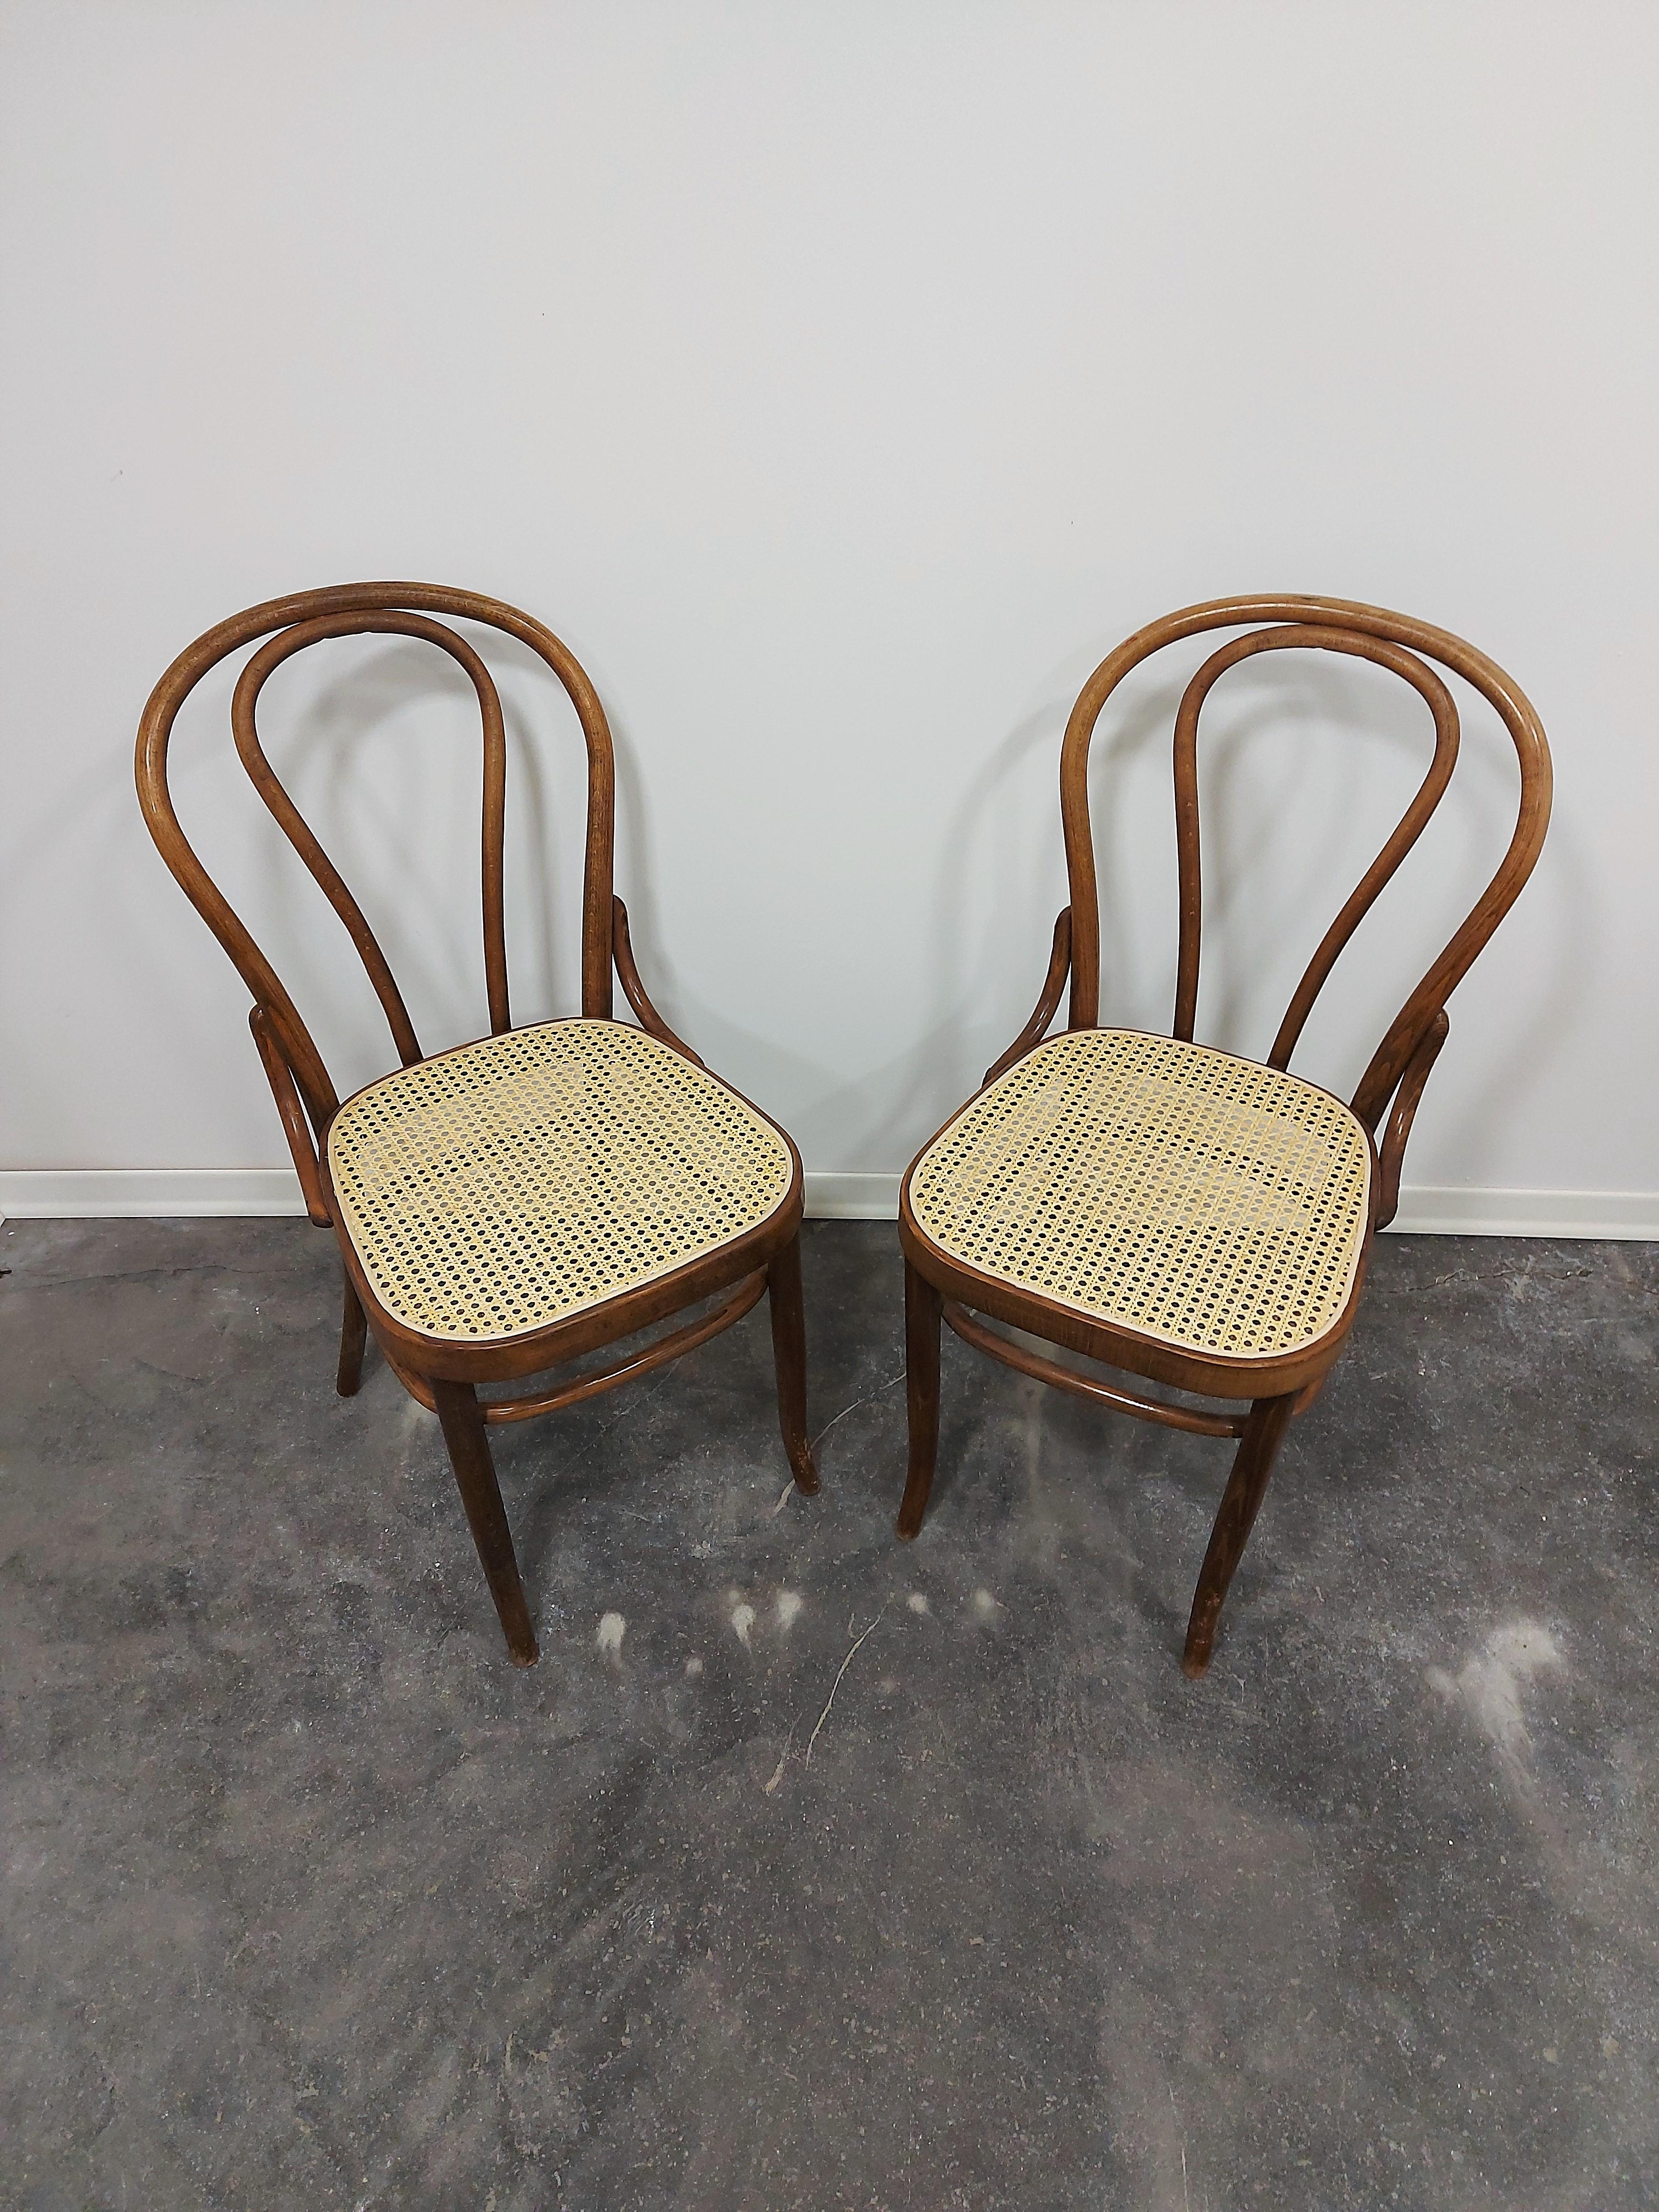 Chair, Thonet Style, Bentwood, Cane - beautiful patina

Period: 1960s

Materials: Bentwood, Cane (new cane seat)

Condition: solid, signs of use, undamaged

Colour: Wood

Dimensions: H = 88cm, W = 41 cm, D = 41 (51) cm, seat height = 47 cm